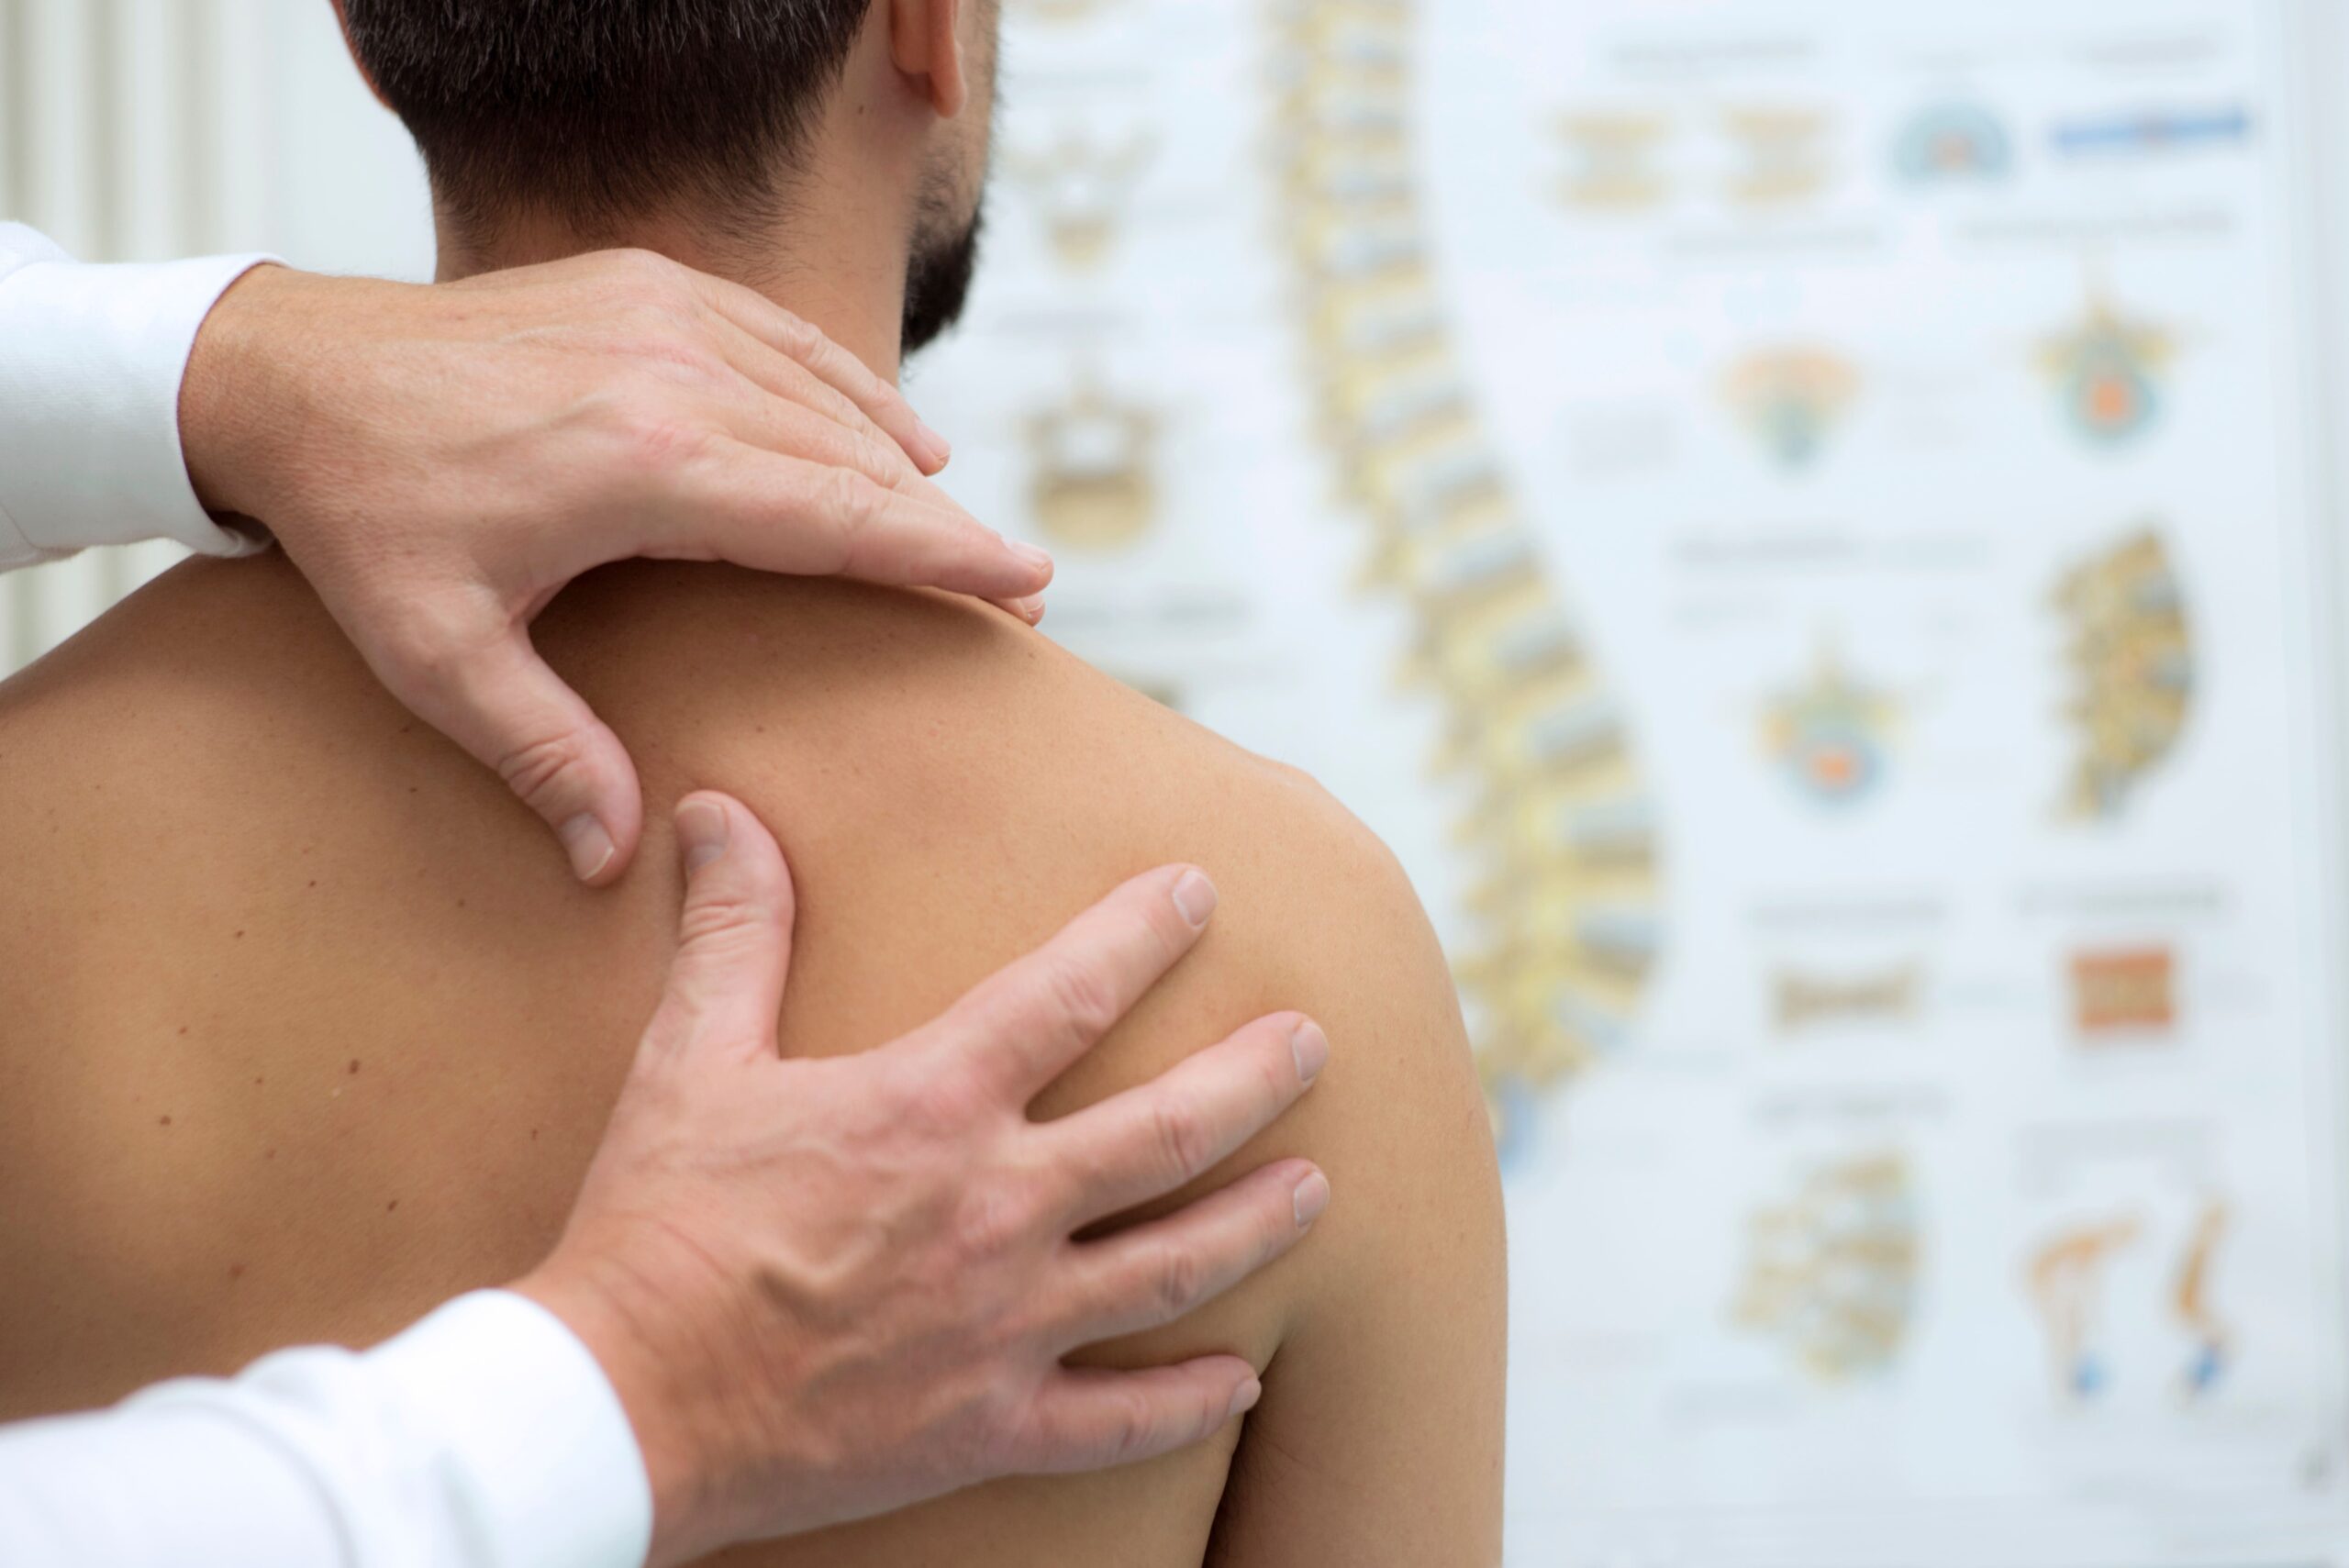 How Chiropractic Adjustments Can Improve Your Posture